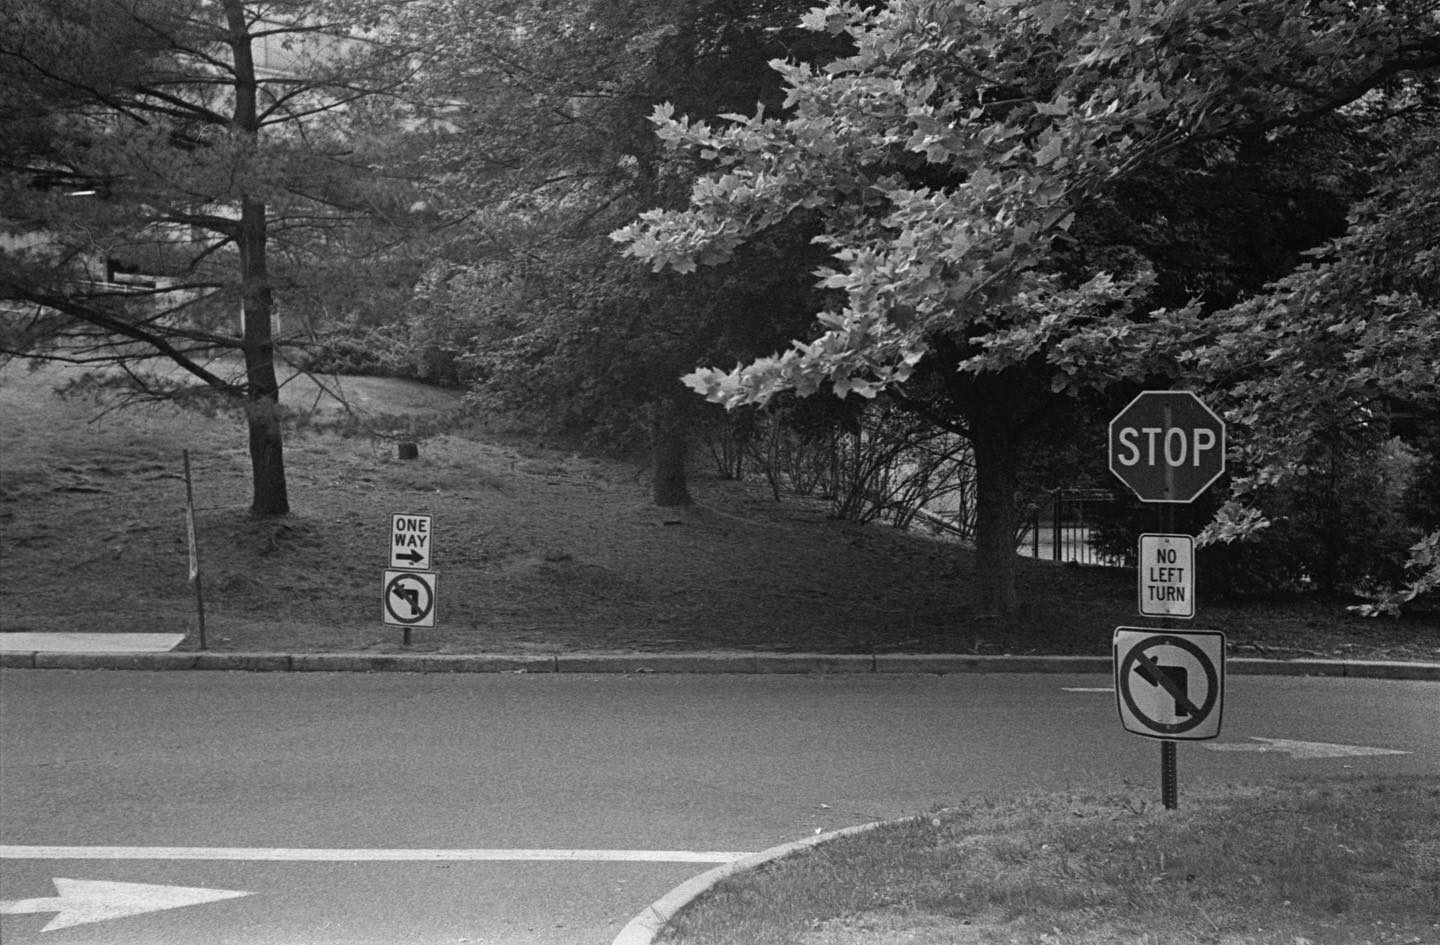 One Way No Left Turn

Roll Film Week day 1, 1/2. Shot with my 1936 vintage #contaxiii on #eastman5222 #doublexx and developed in #rodinal 1:50. #film #filmphotography #rollfilmweek #rollfilmweek2020